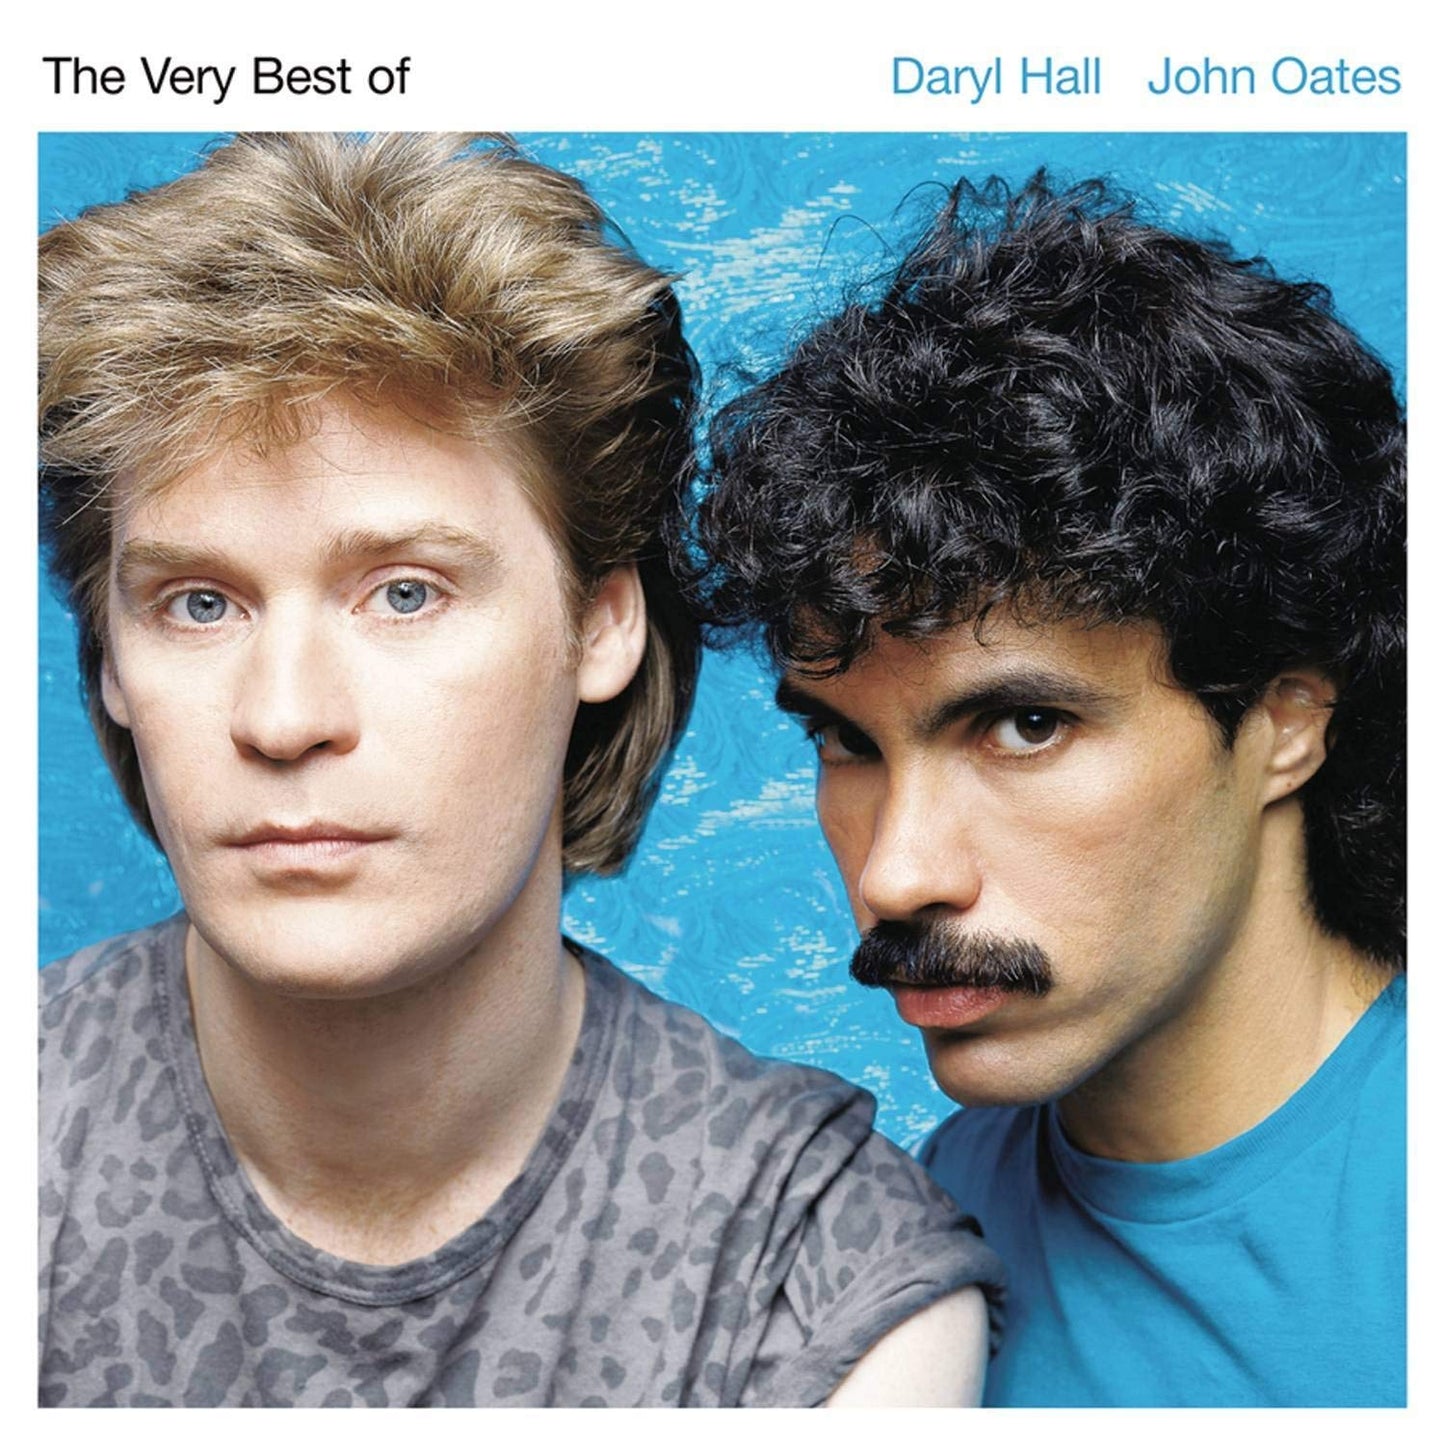 Hall & Oates - The Very Best Of - LP